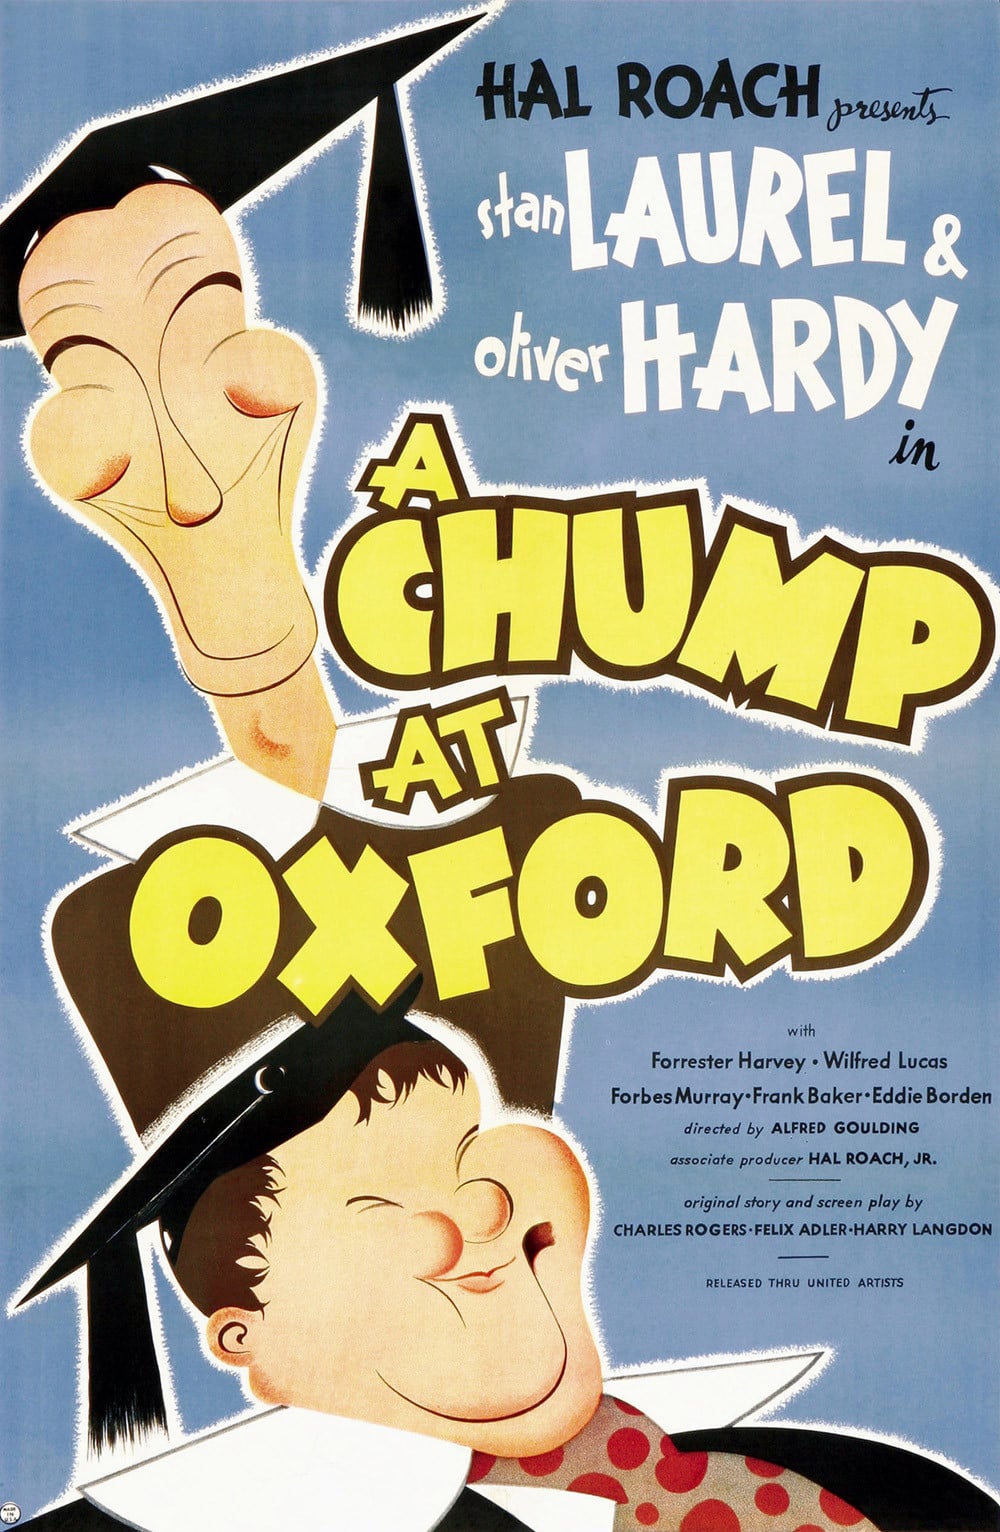 Poster for the movie "A Chump at Oxford"